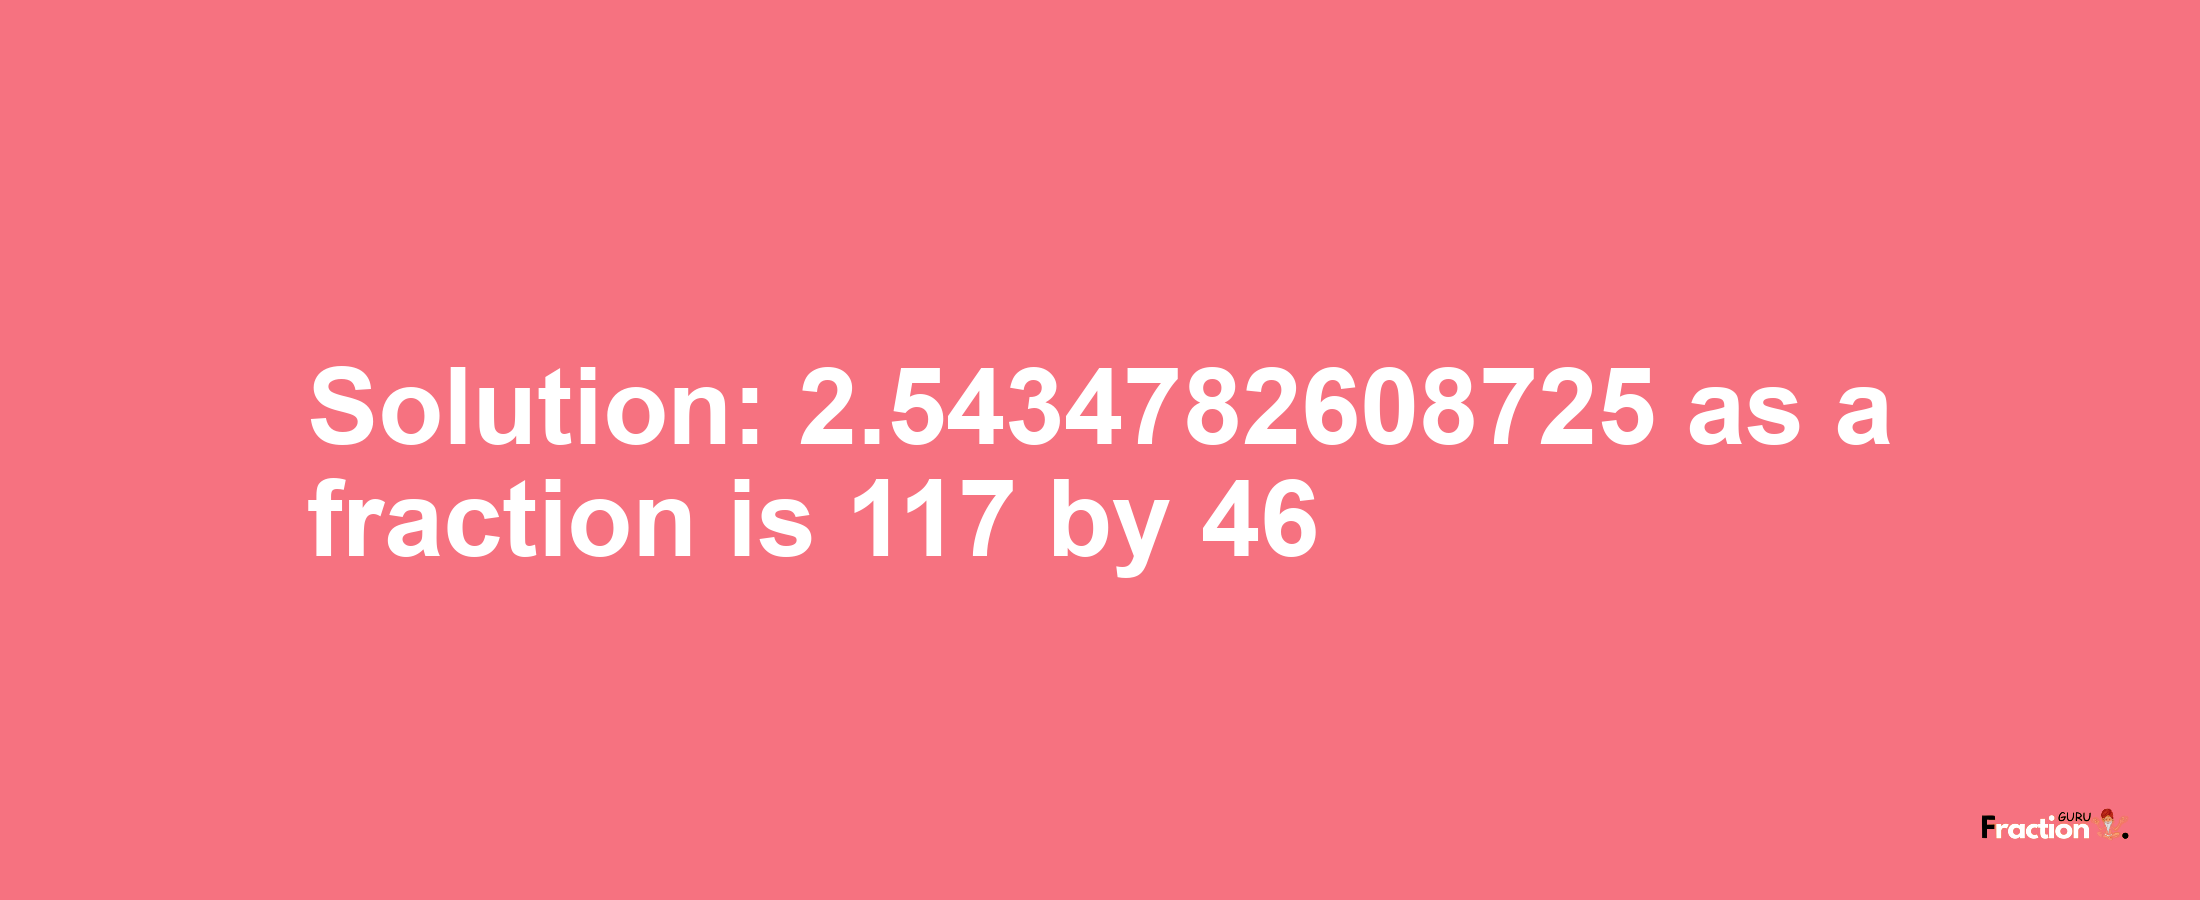 Solution:2.5434782608725 as a fraction is 117/46